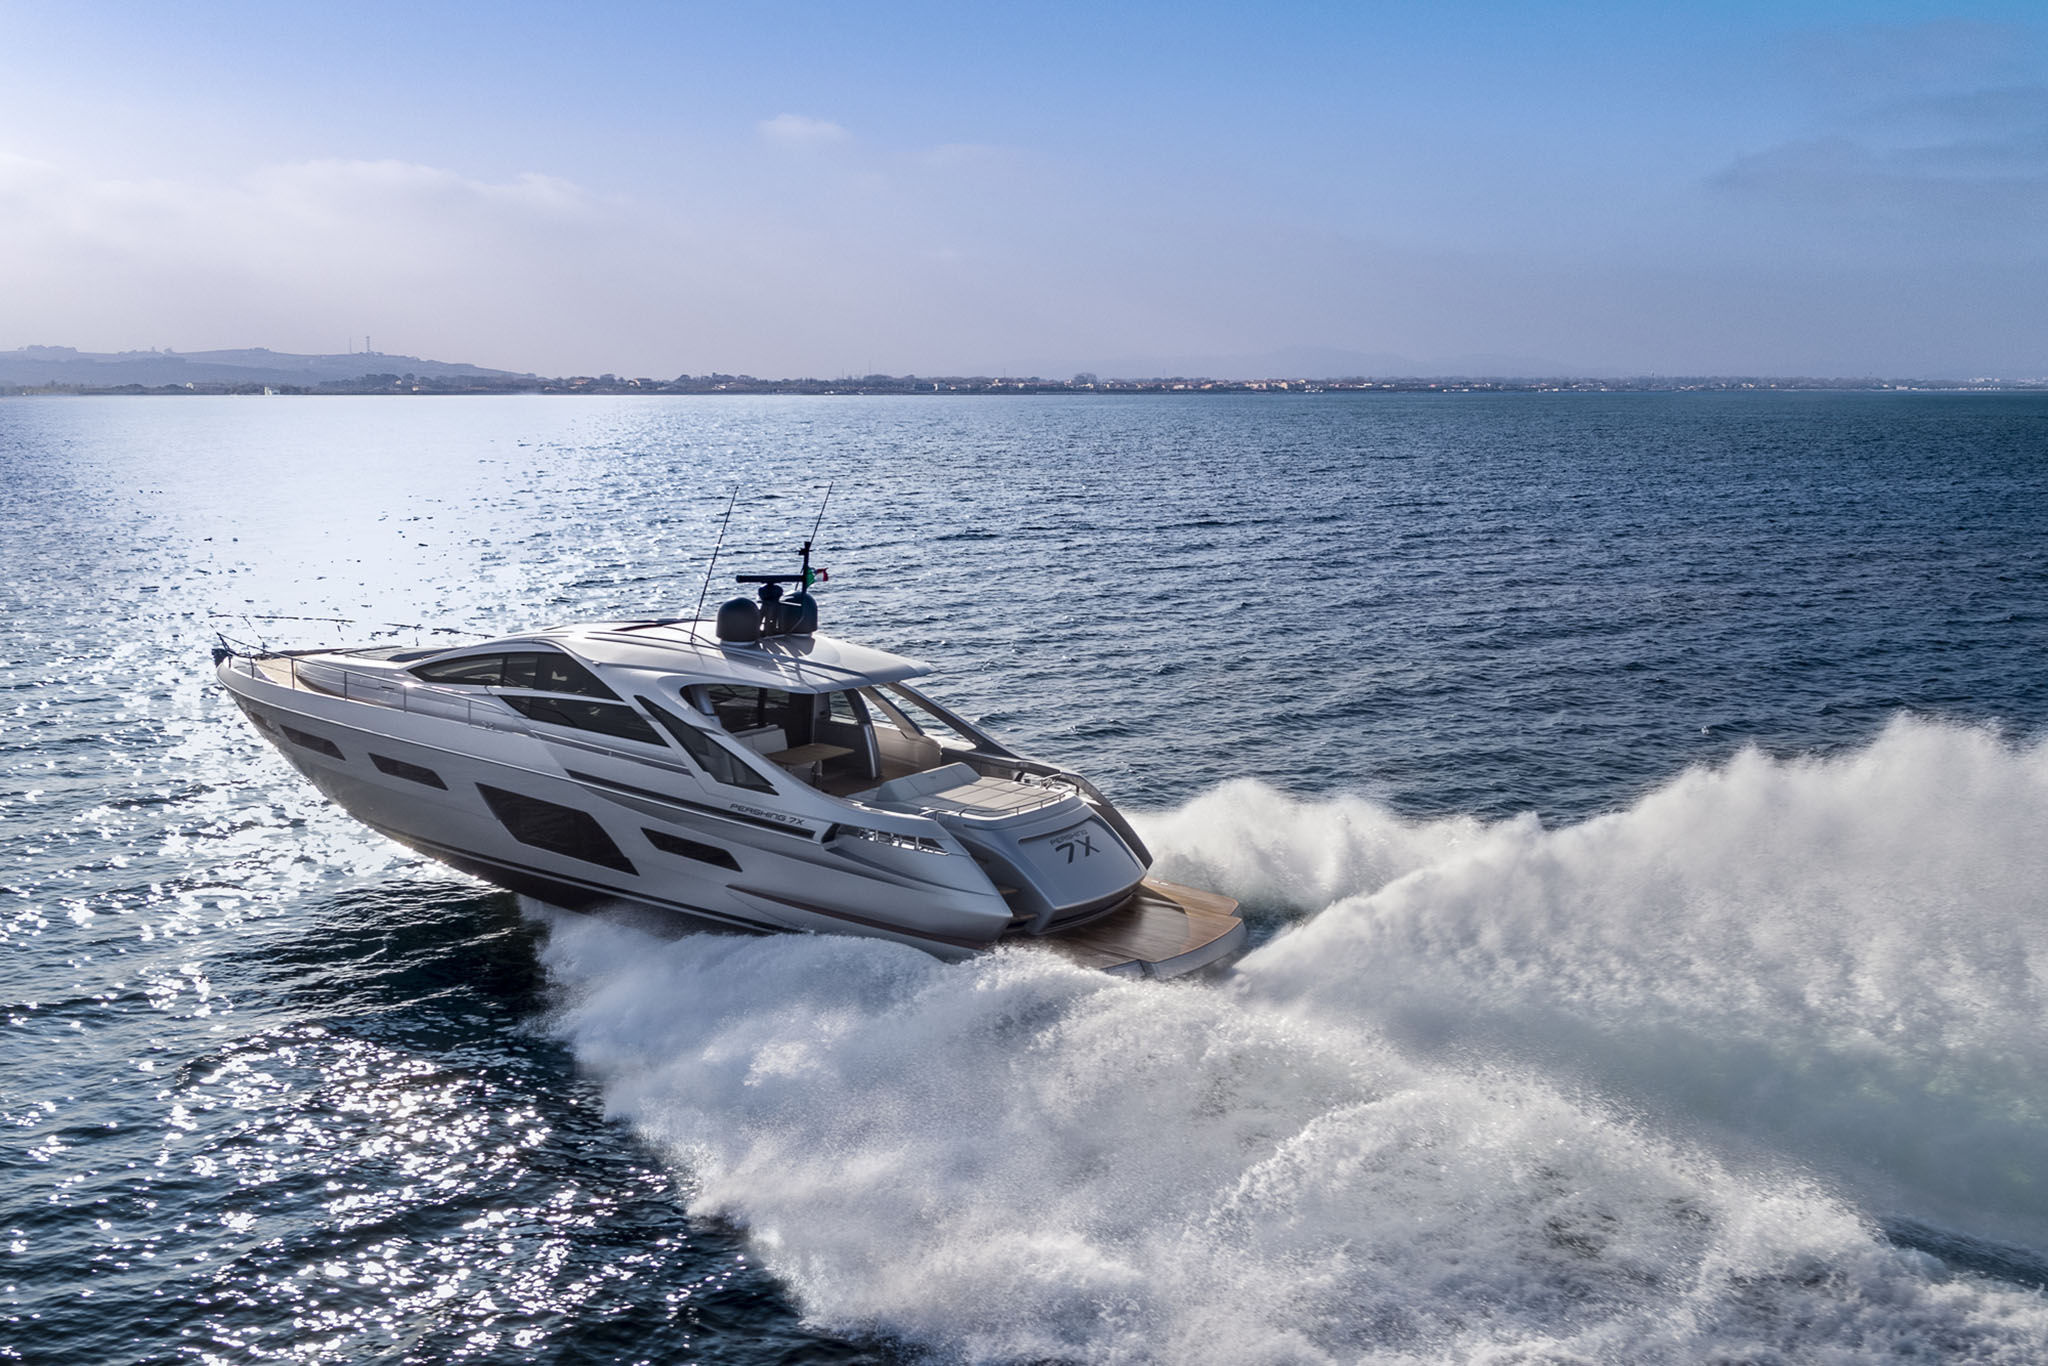 Pleasure Boat: Pershing 7X, Luxury and speed motor yacht designed for active leisure. 2050x1370 HD Wallpaper.